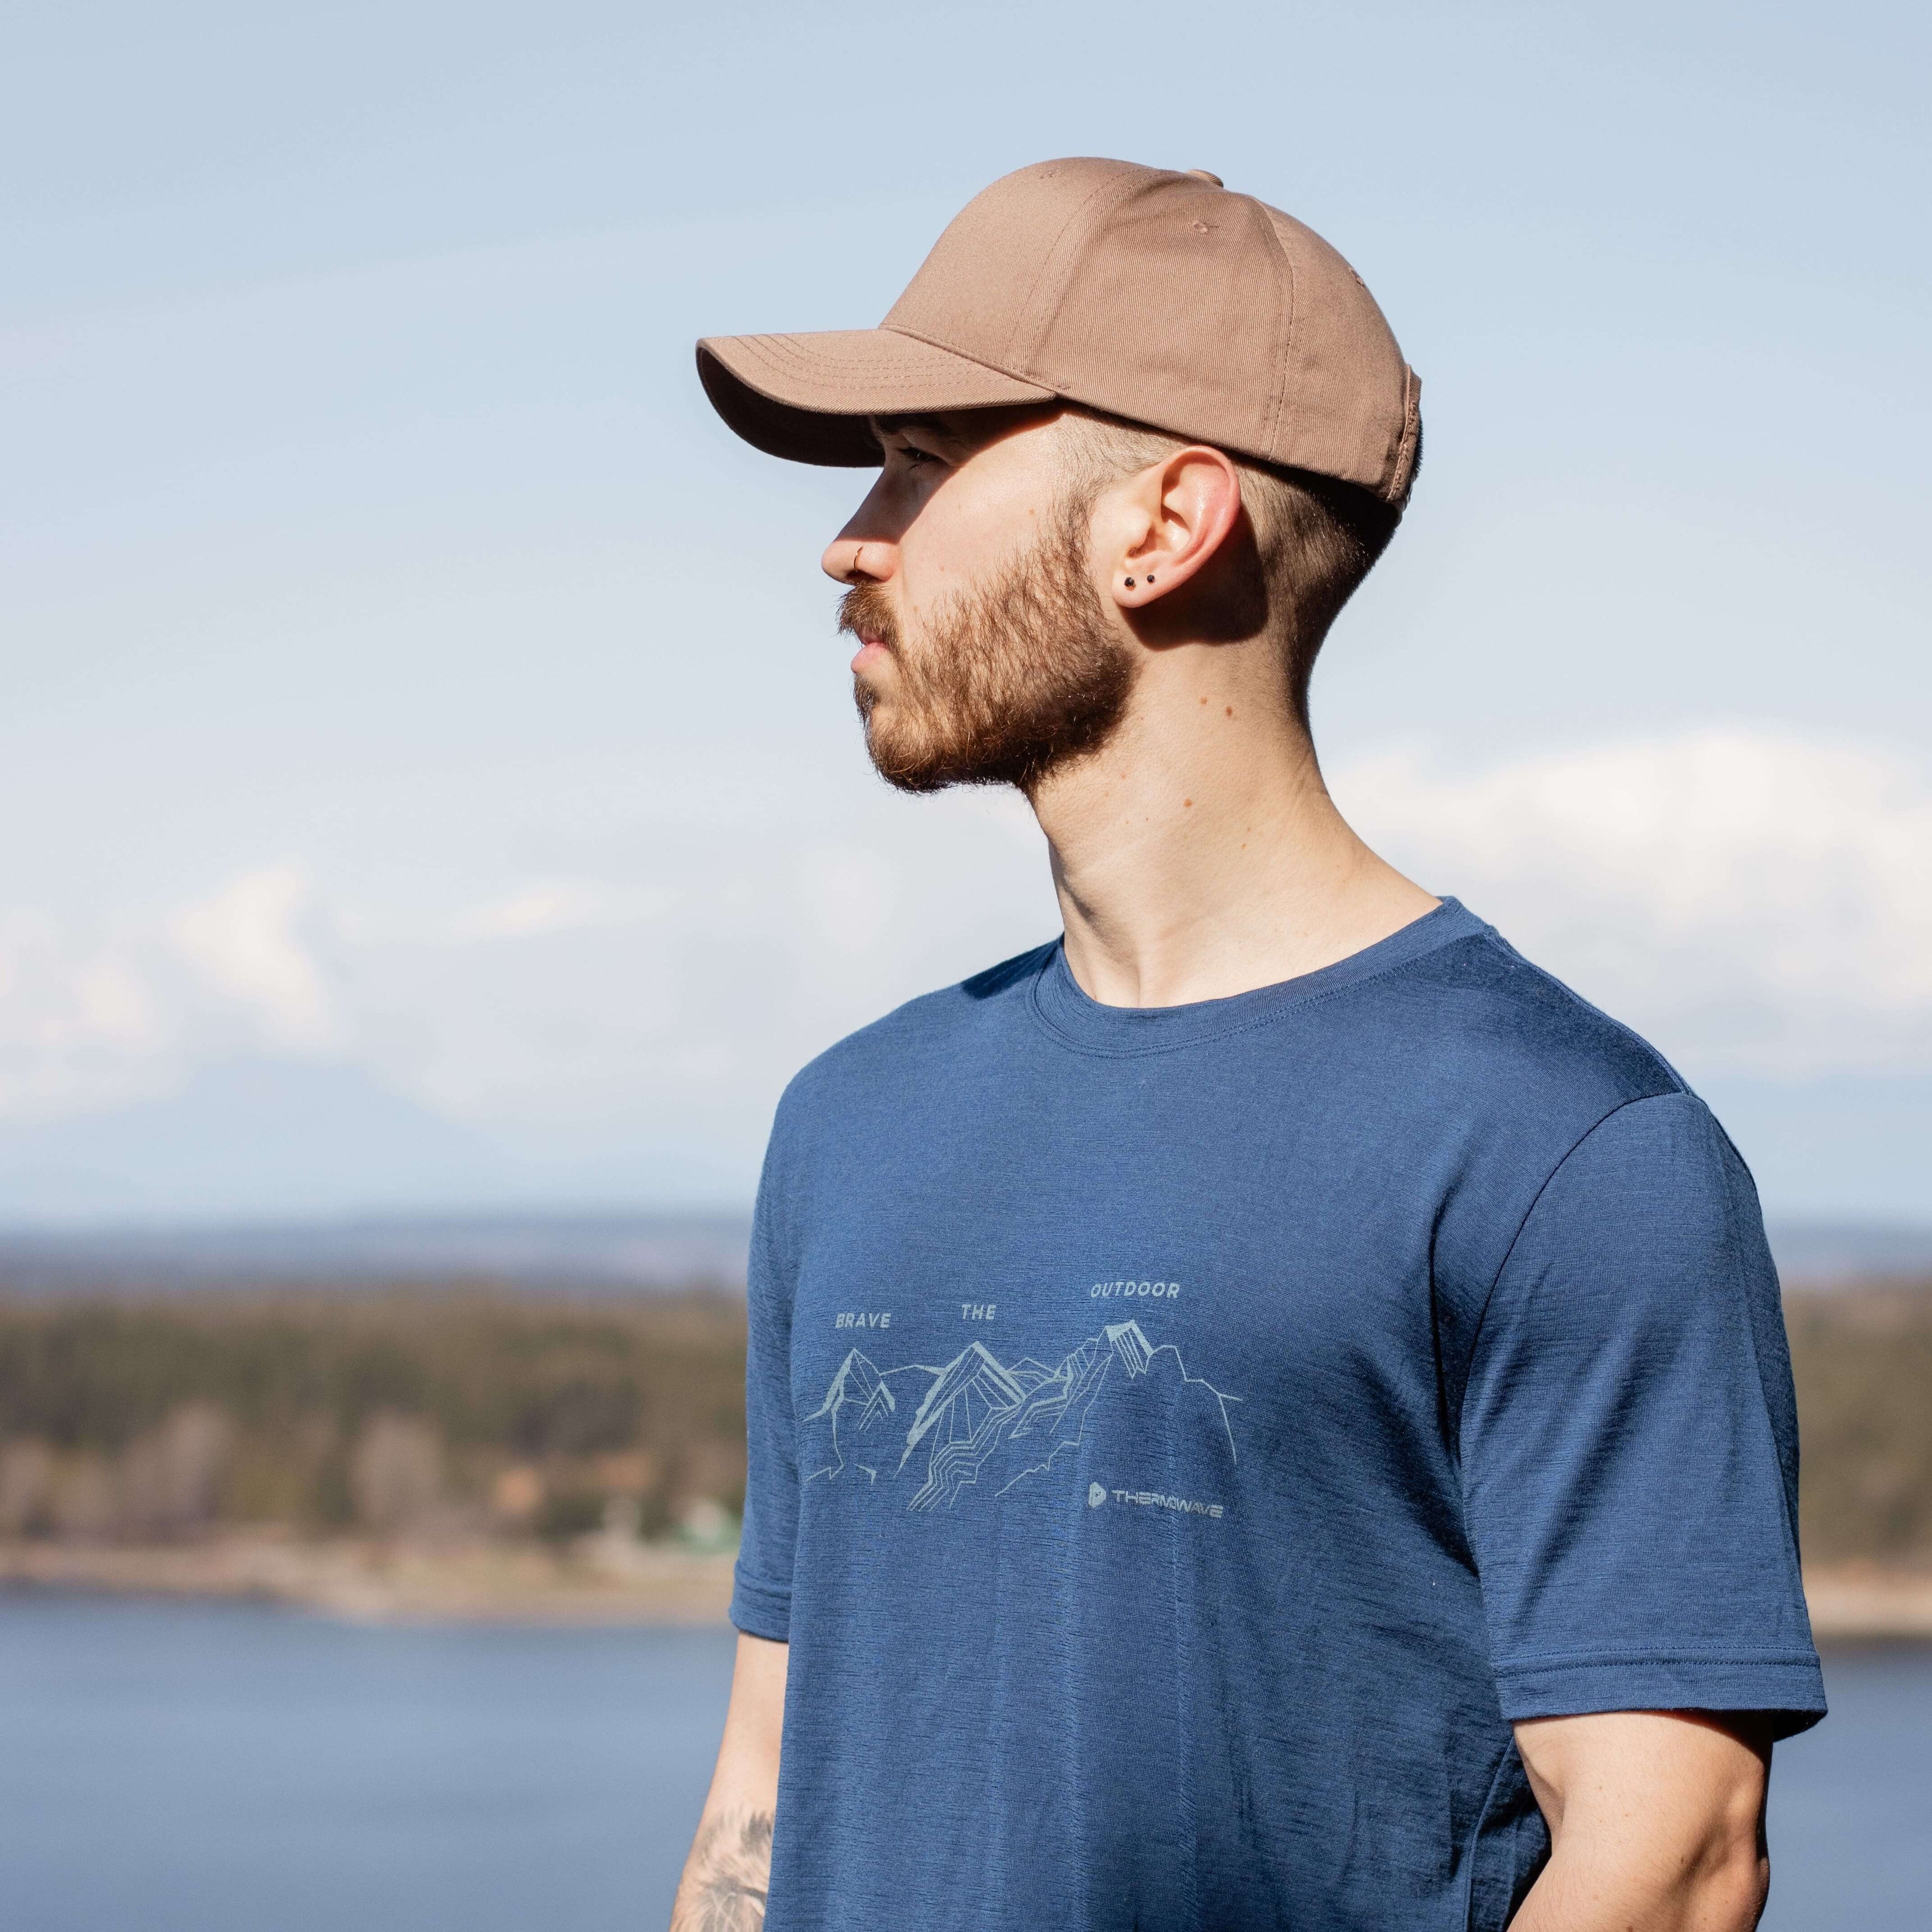 a-man-with-blue-t-shirt-with-mountains-logo